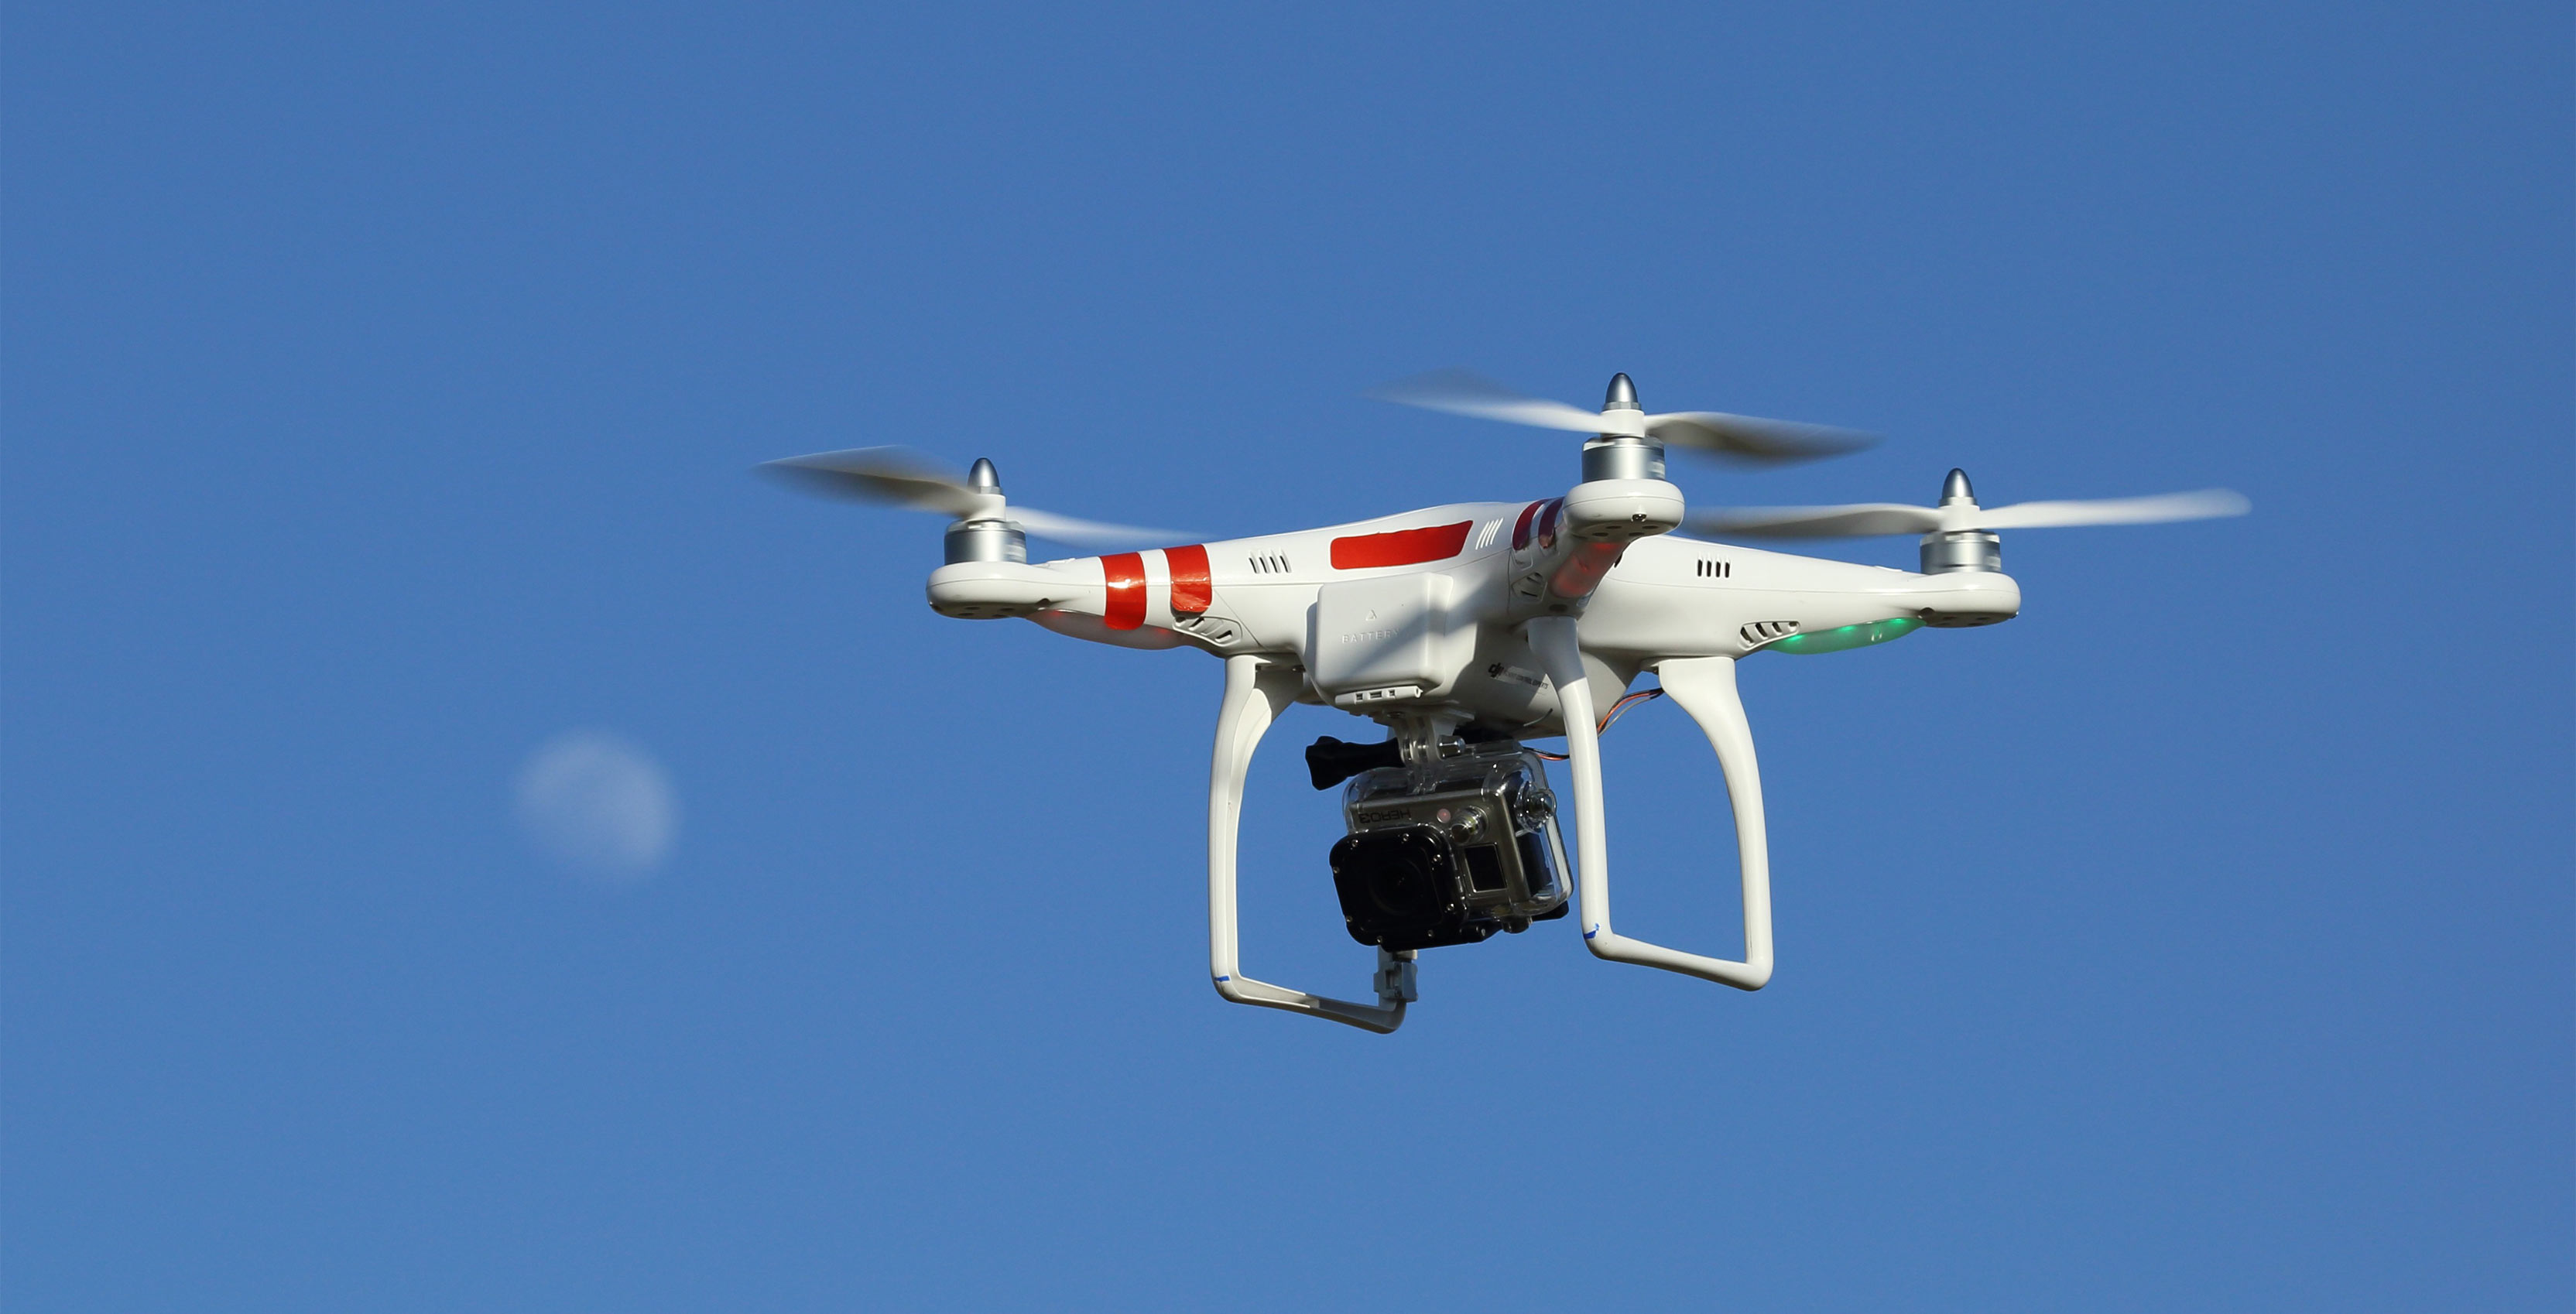 Aerial drone regulations released